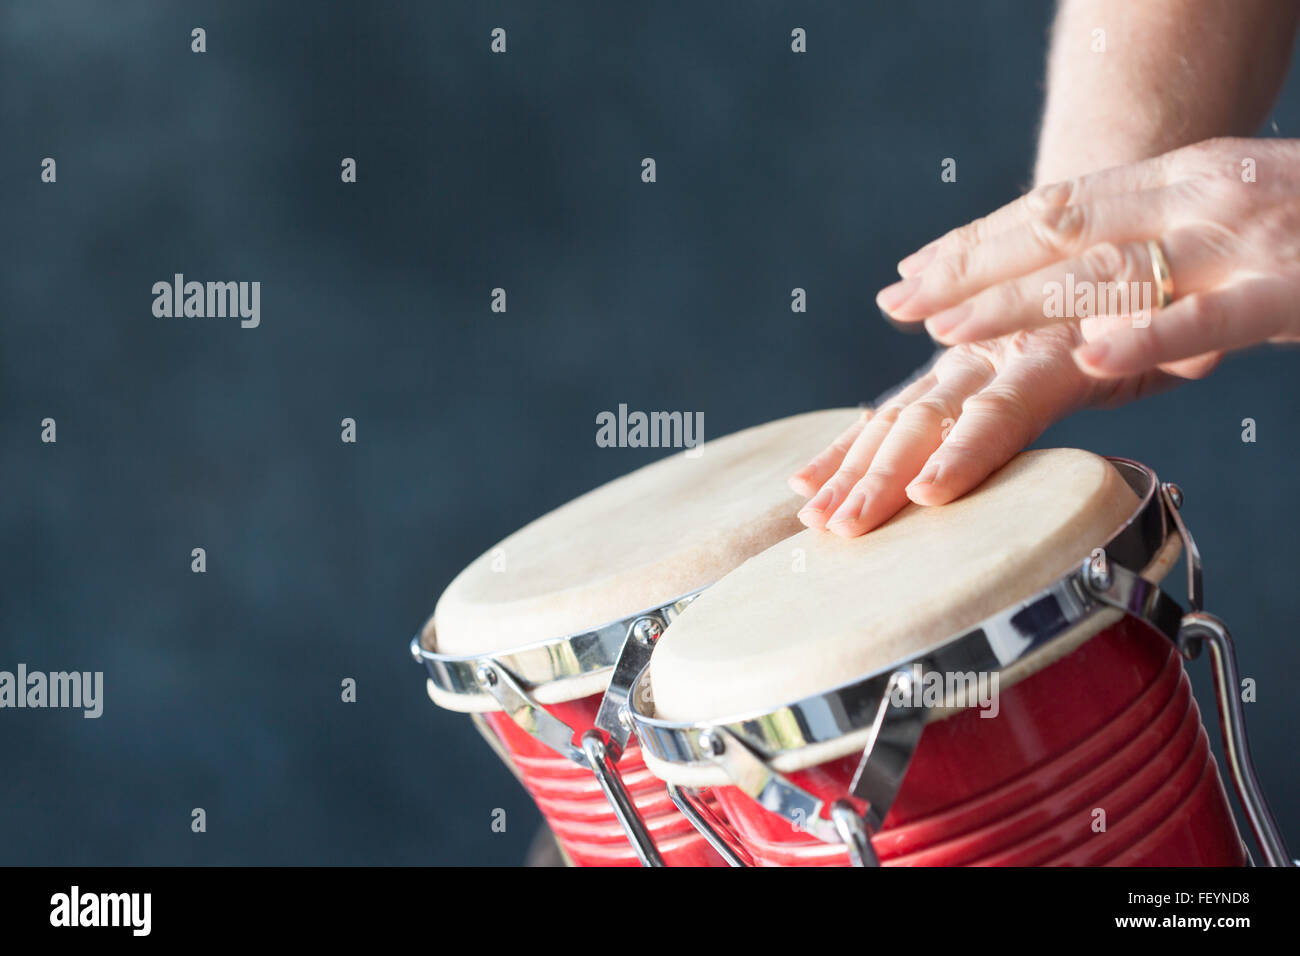 Hands playing red bongo drums with a grey background Stock Photo